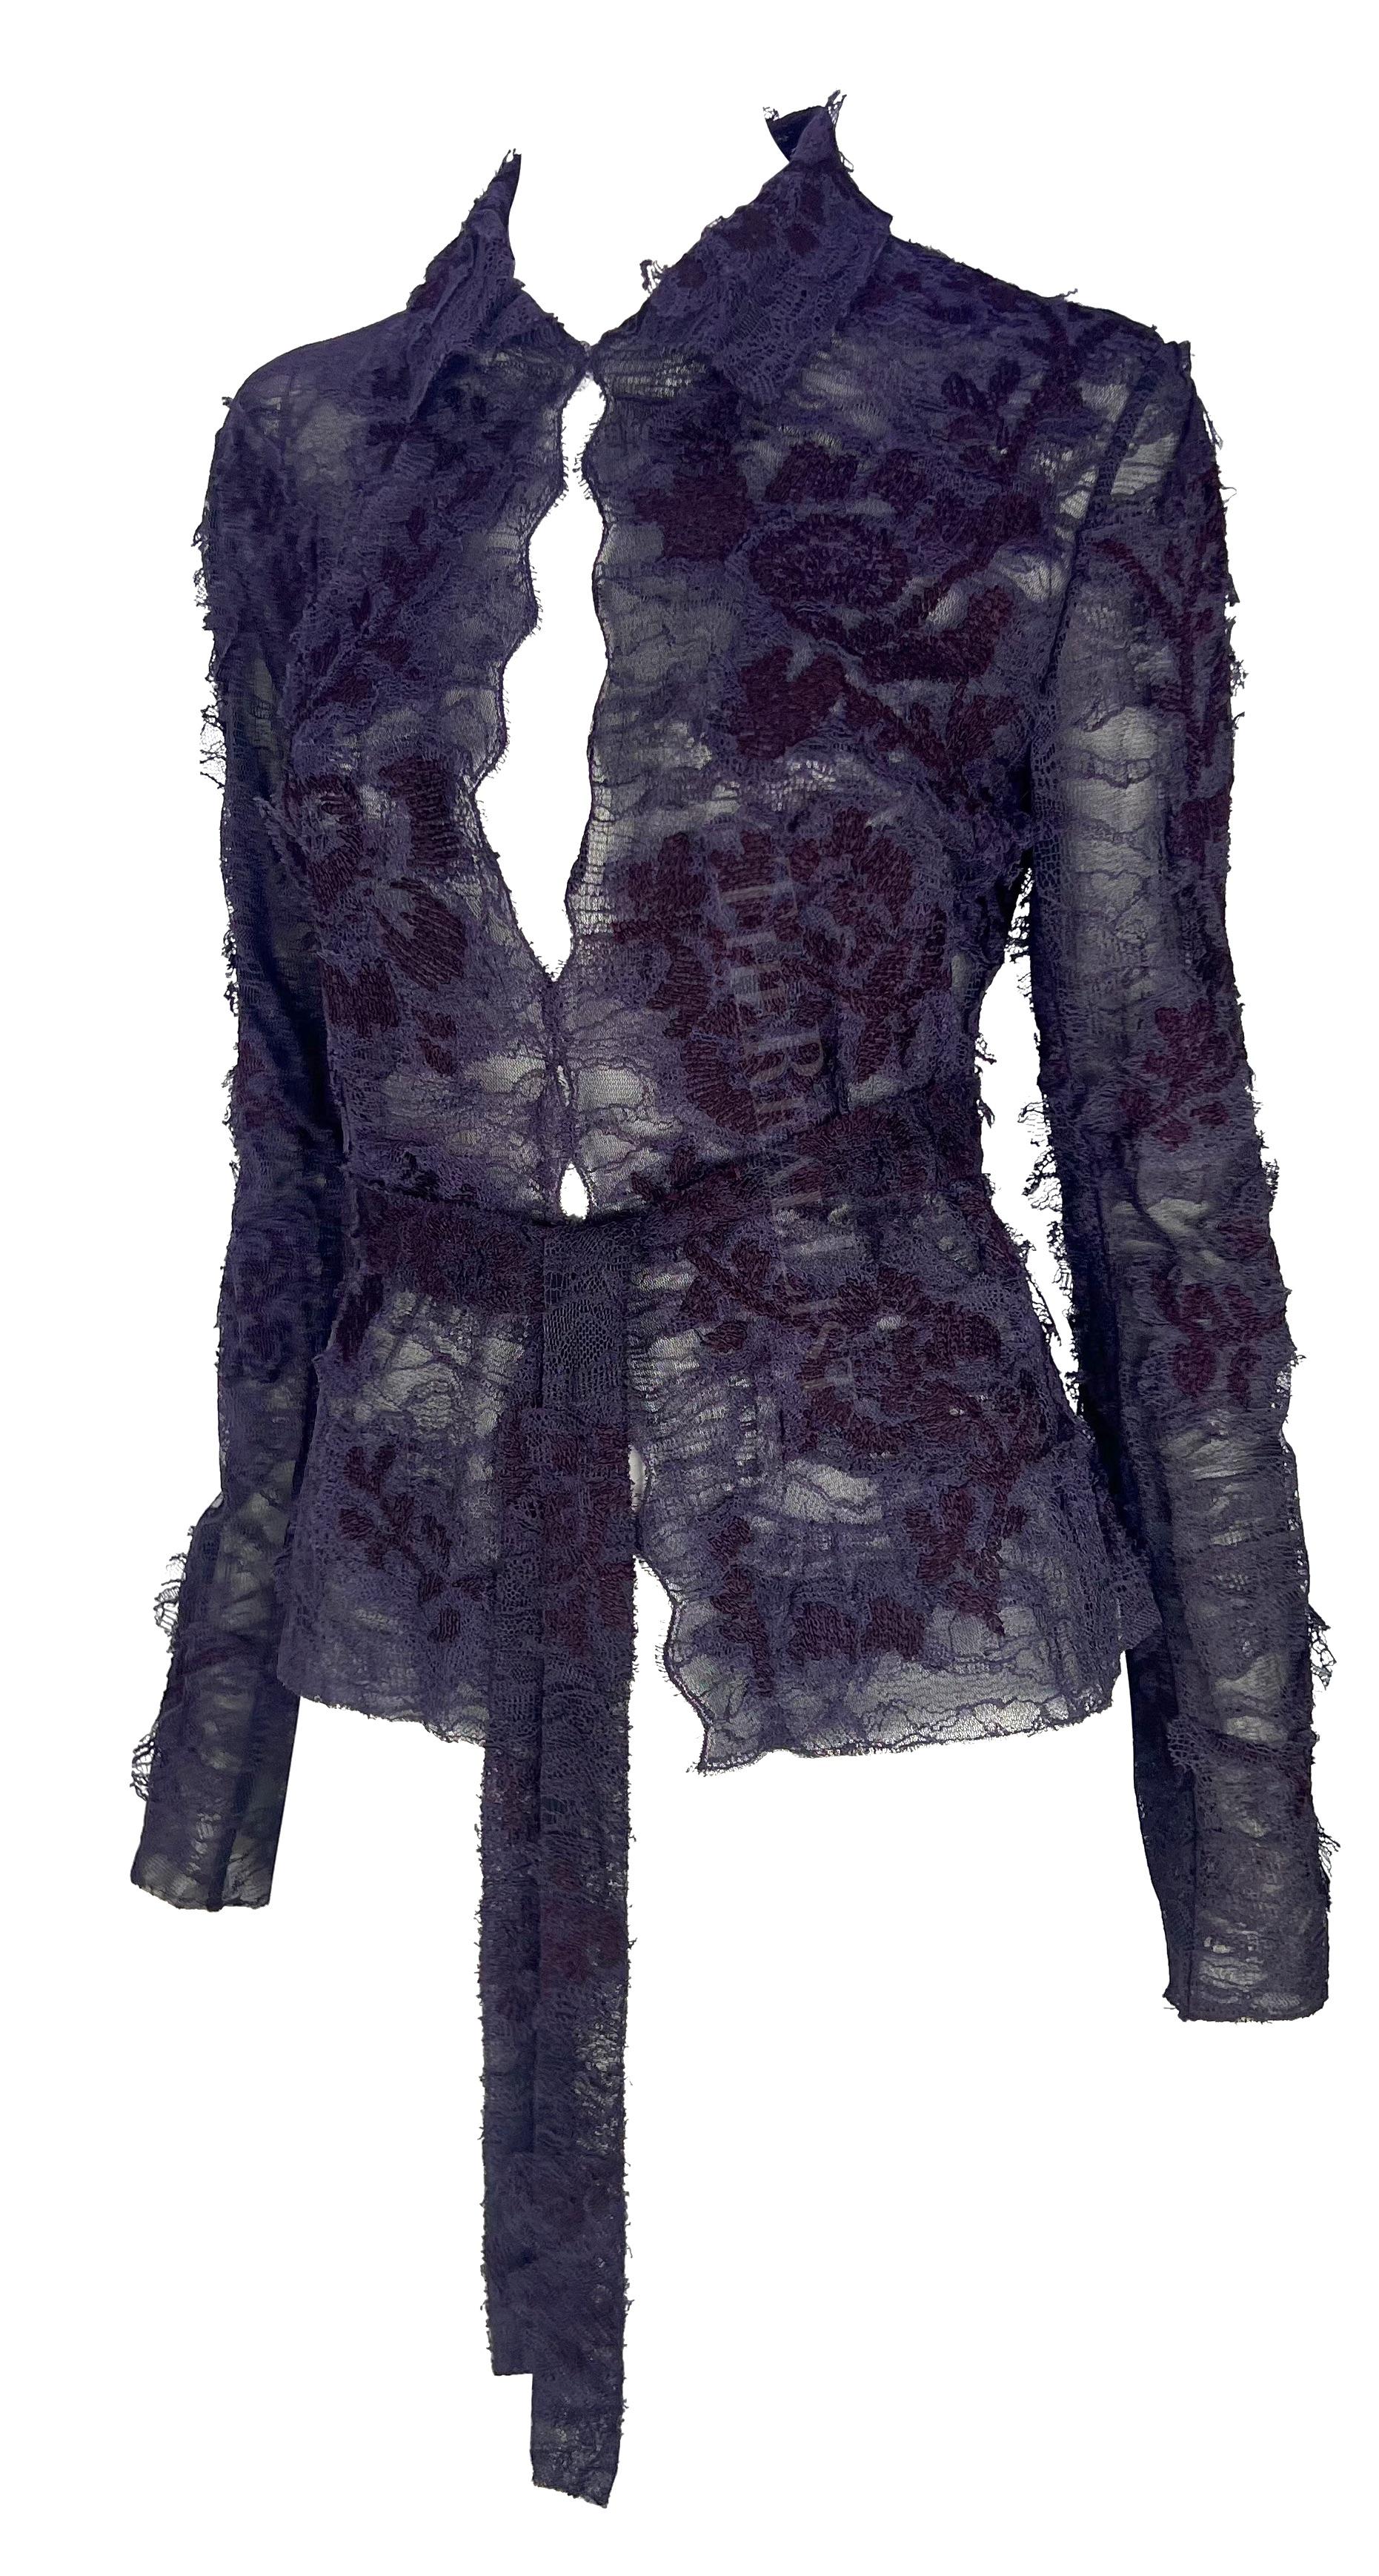 F/W 2001 Yves Saint Laurent by Tom Ford Runway Purple Floral Lace Tie Blouse In Excellent Condition For Sale In West Hollywood, CA